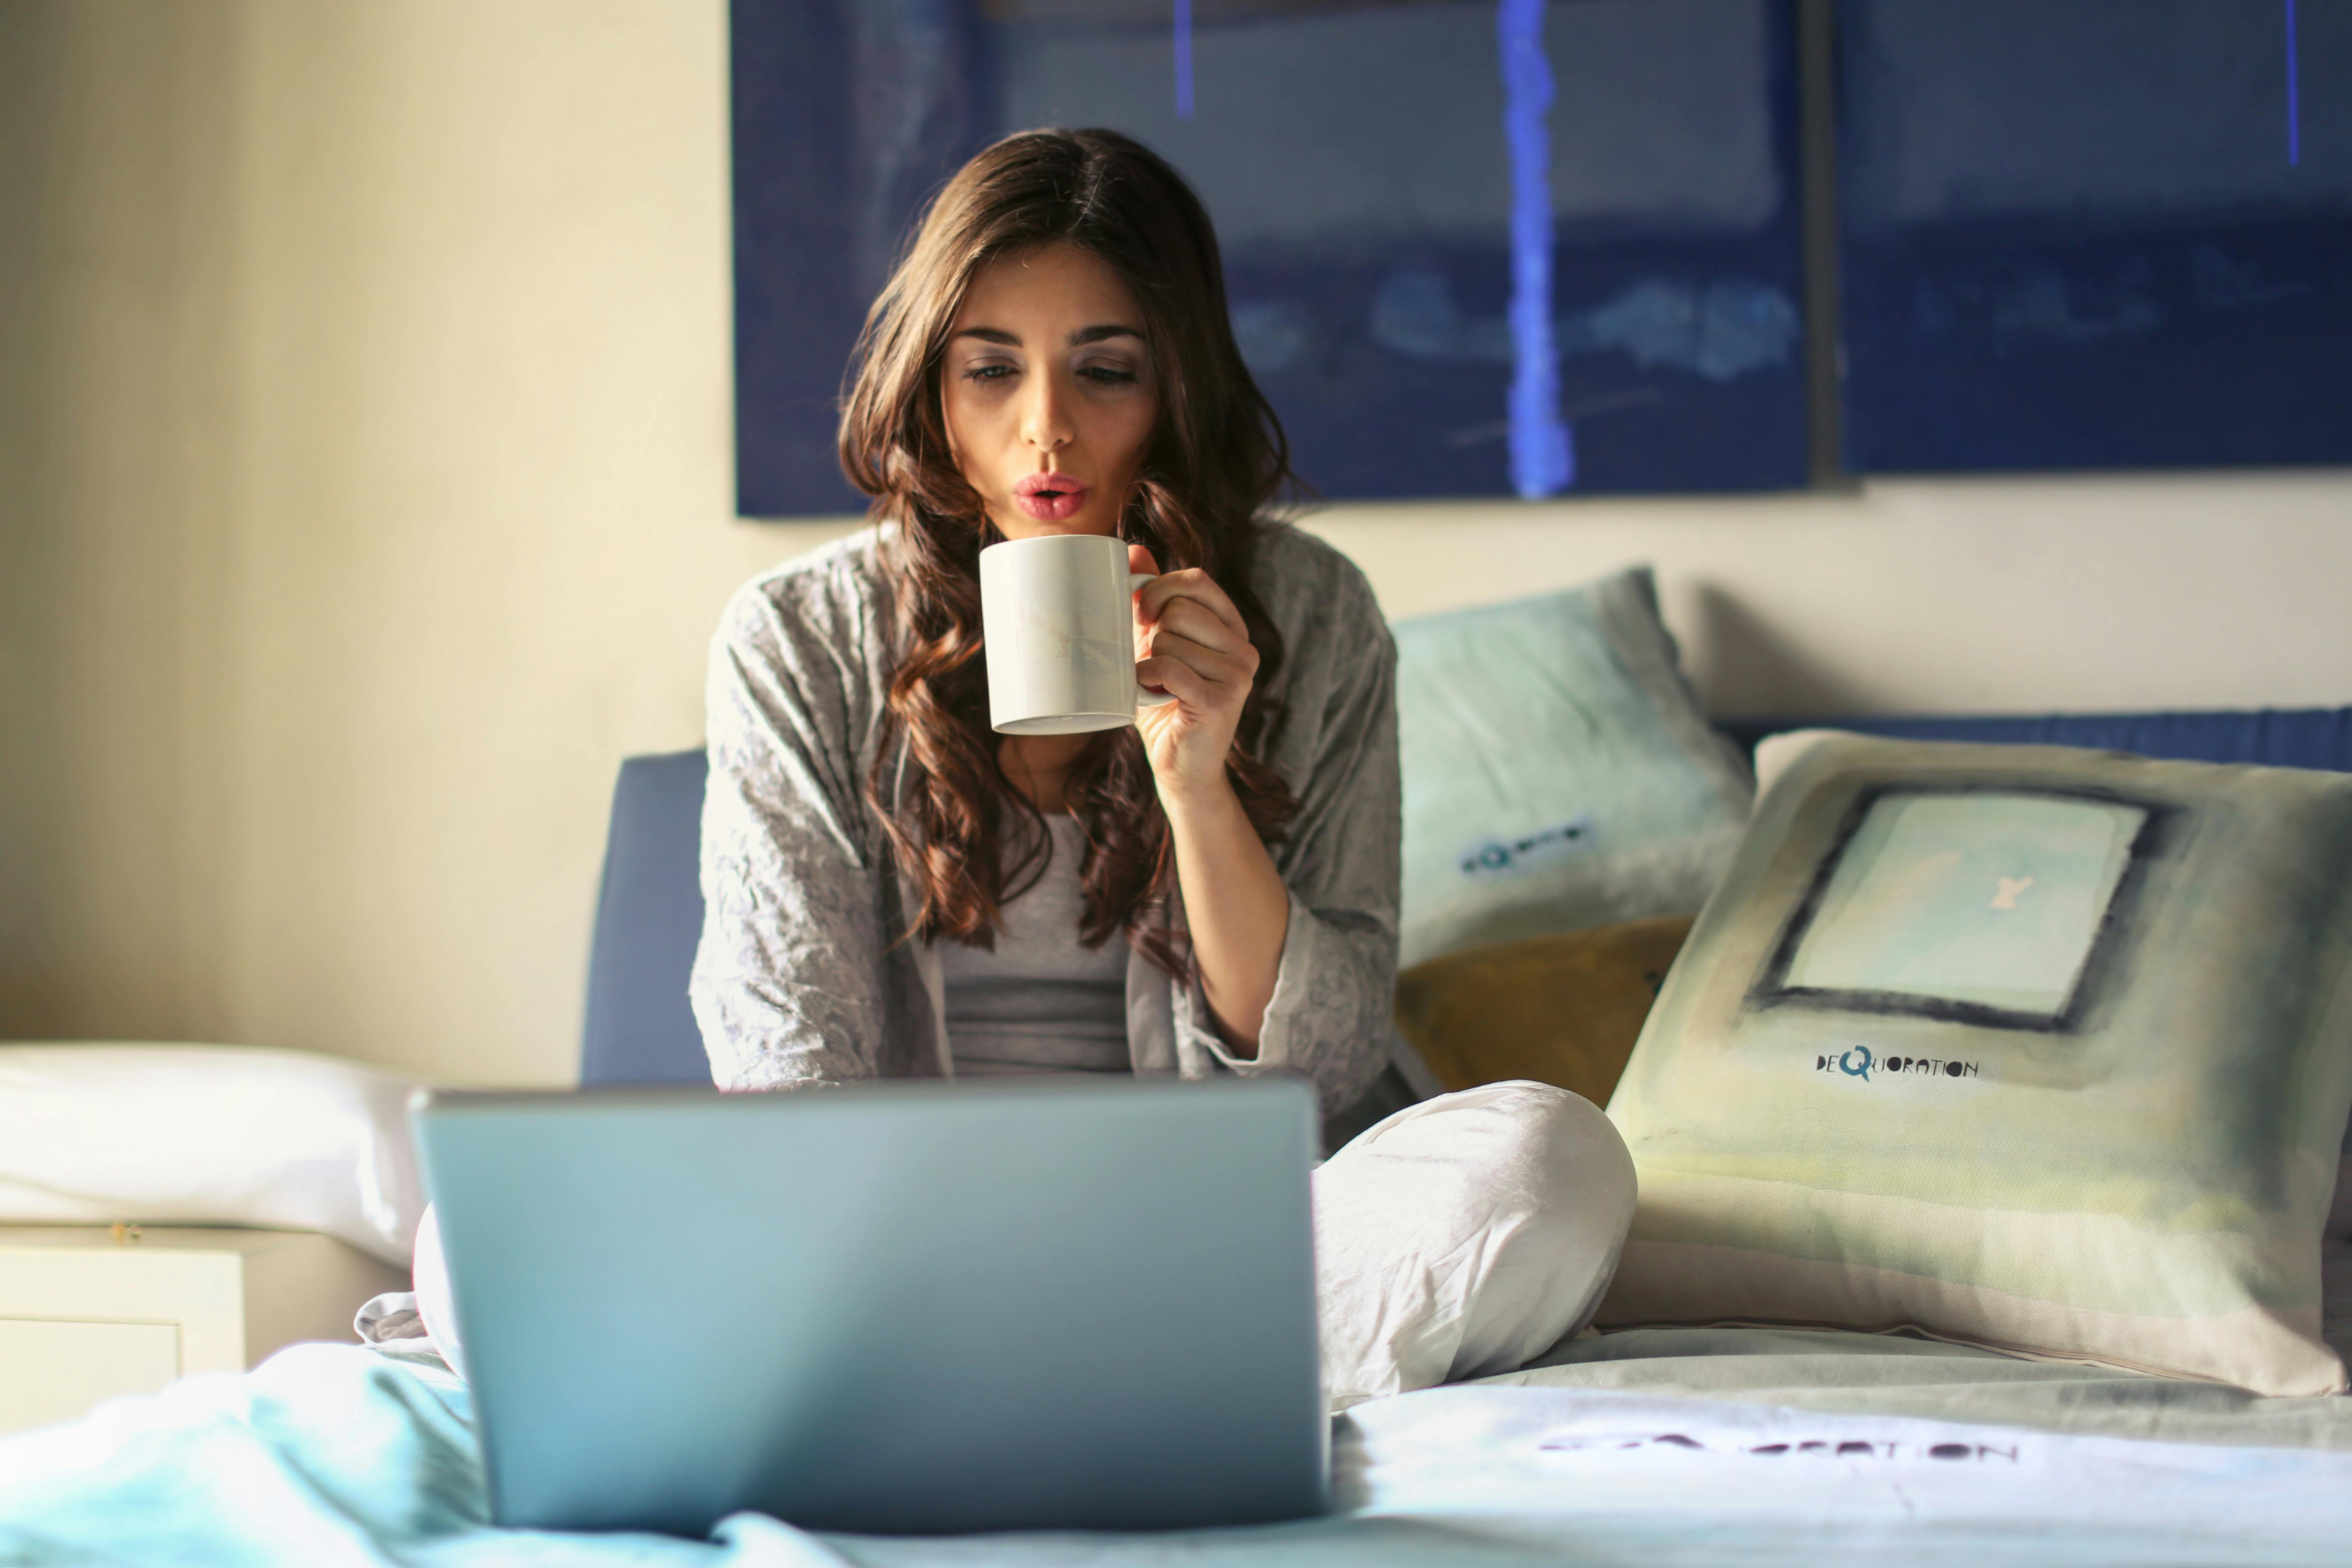 woman in grey sitting in front of a laptop in bed drinking coffee from a mug